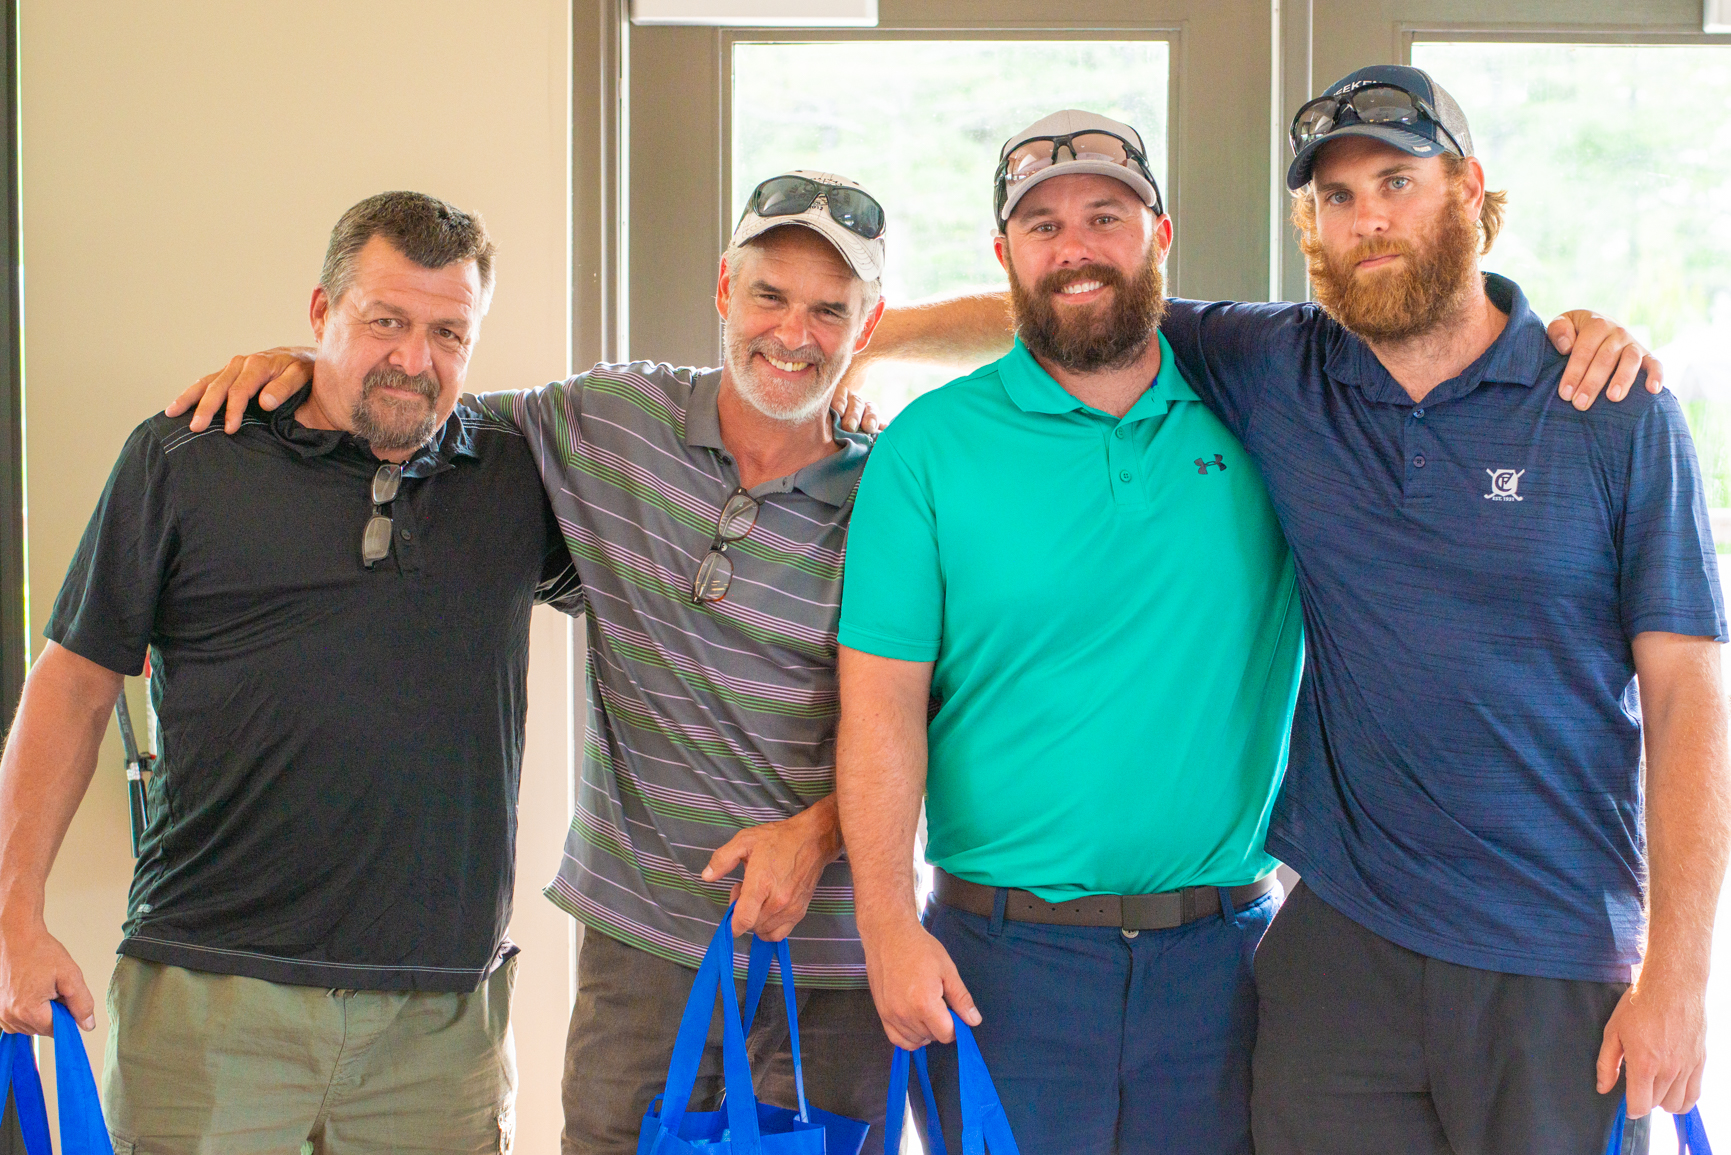 craig dool and team winning low gross at the Norm Jary golf tournament